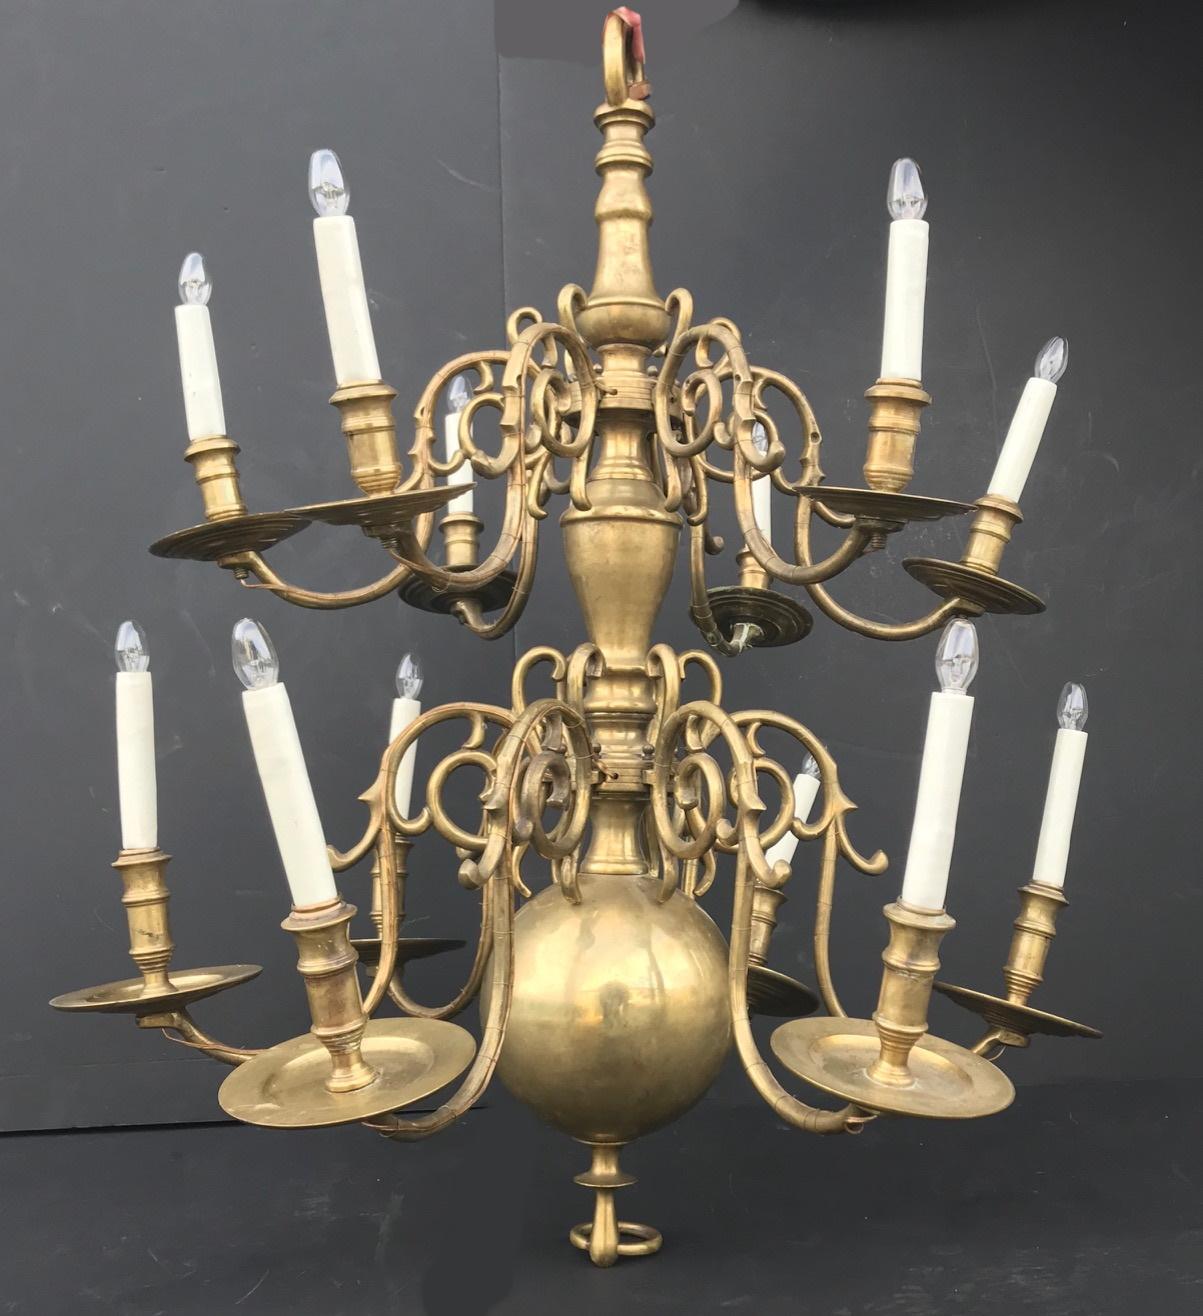 Dutch chandelier, large brass 18th century hanging lights, baroque, two-tiered, 12-light, good working condition.

This heavy antique chandelier is casted in solid brass. It has a well proportioned baluster stem and a large, massive centre sphere